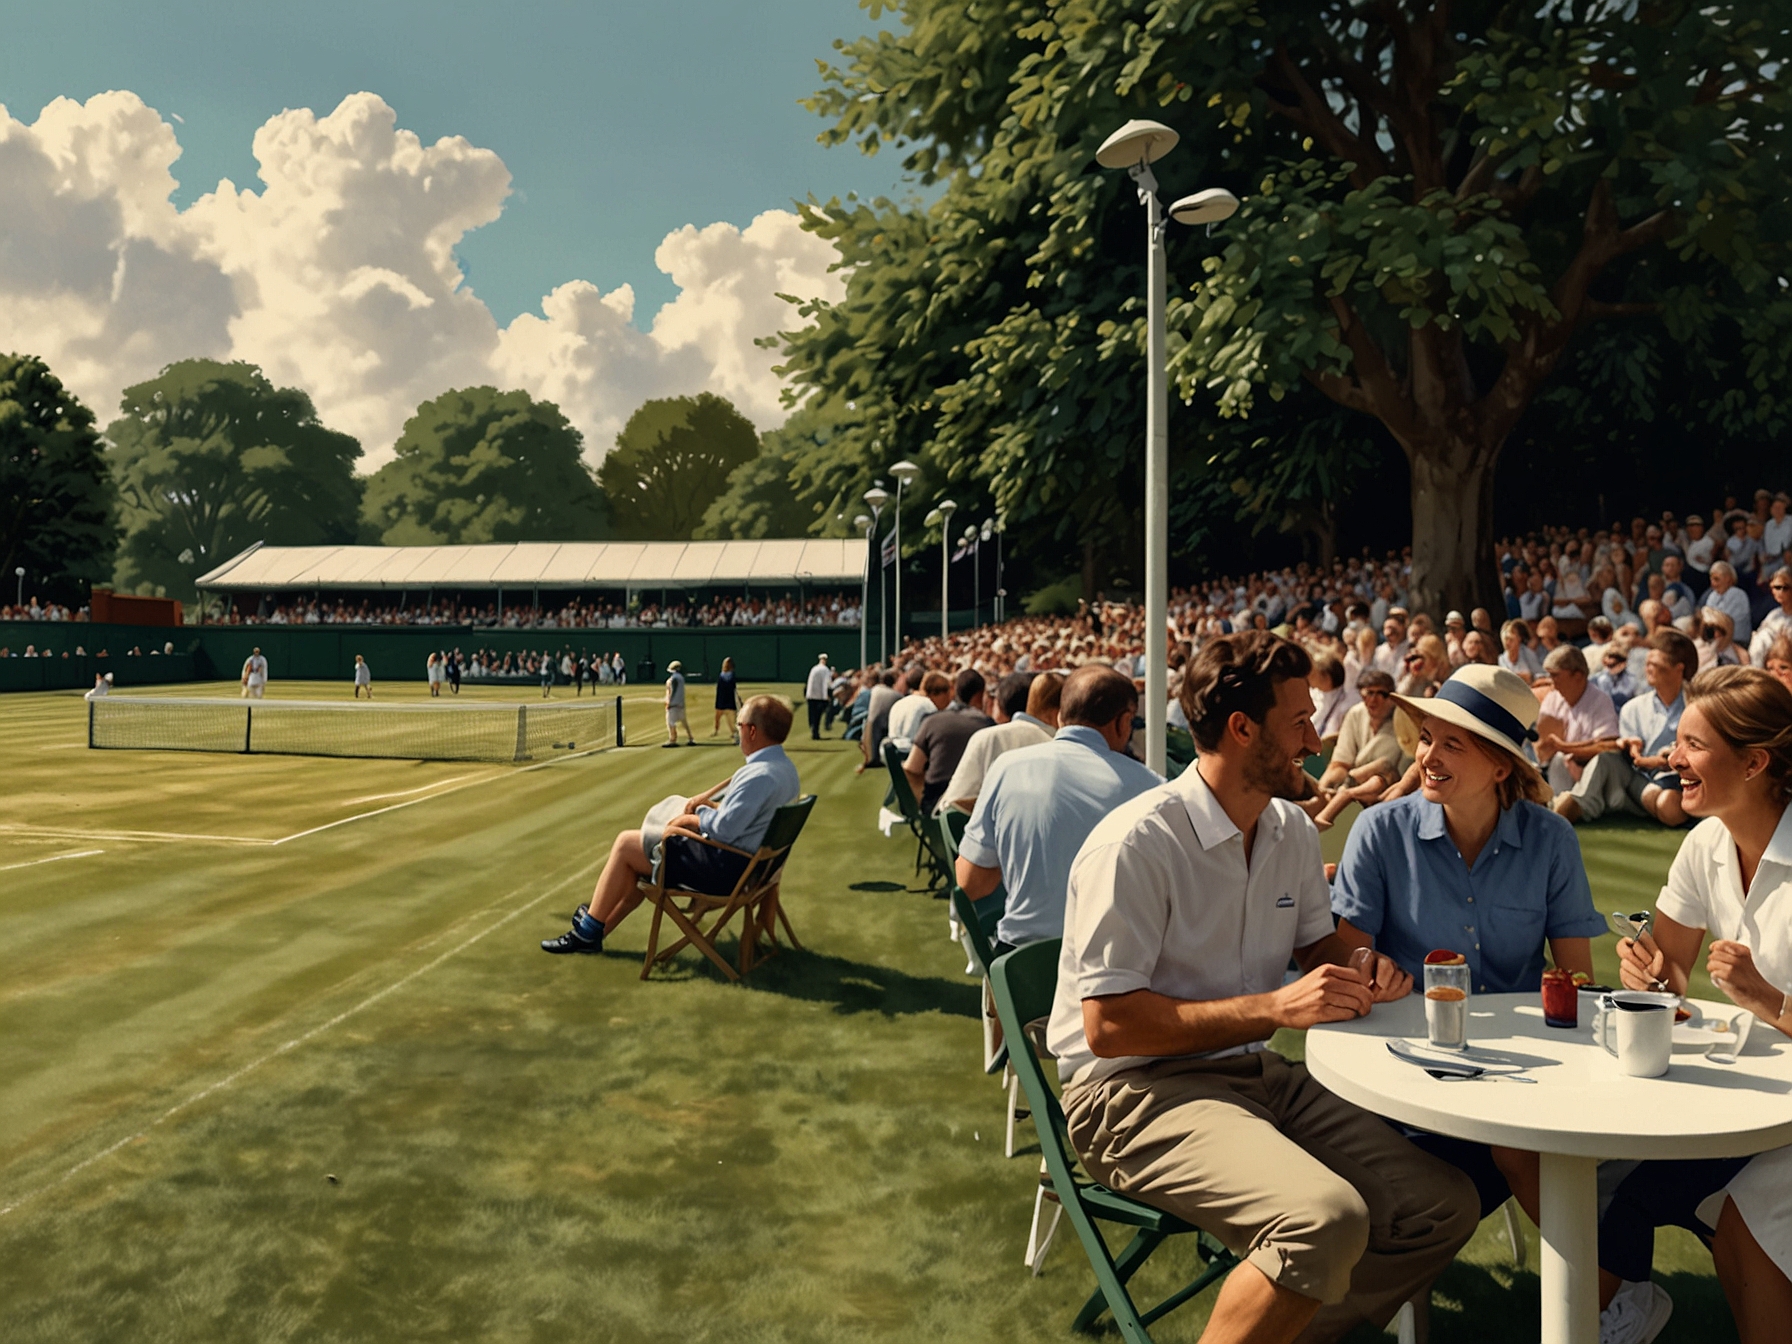 Fans enjoy strawberries and cream while watching matches on the lush grounds of the All England Club, embodying the charm and tradition of Wimbledon.